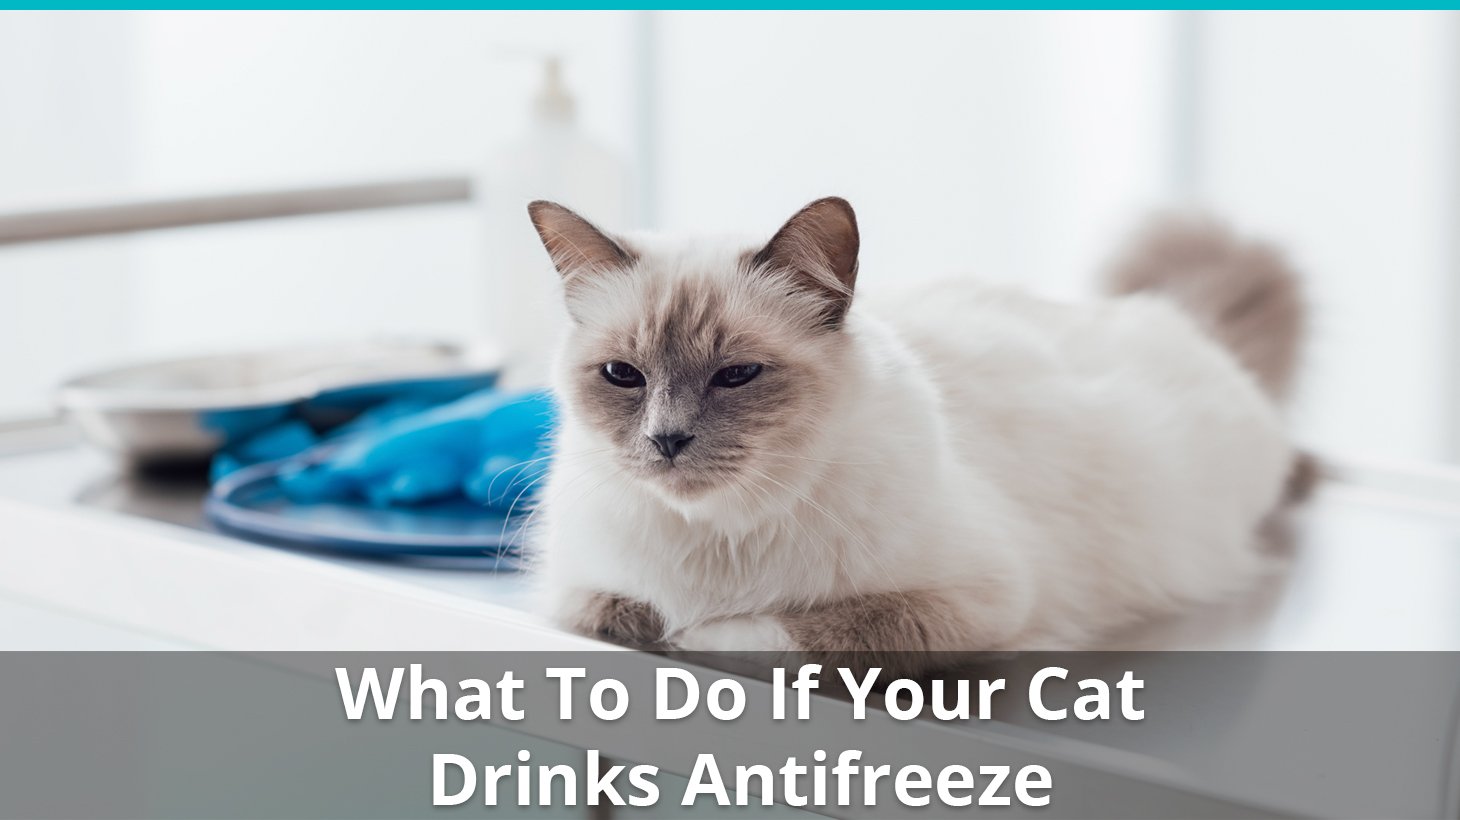 40 Top Photos Symptoms Of Antifreeze Poisoning In Cats / Feline Organophosphate Toxicity can cause Neurological ...